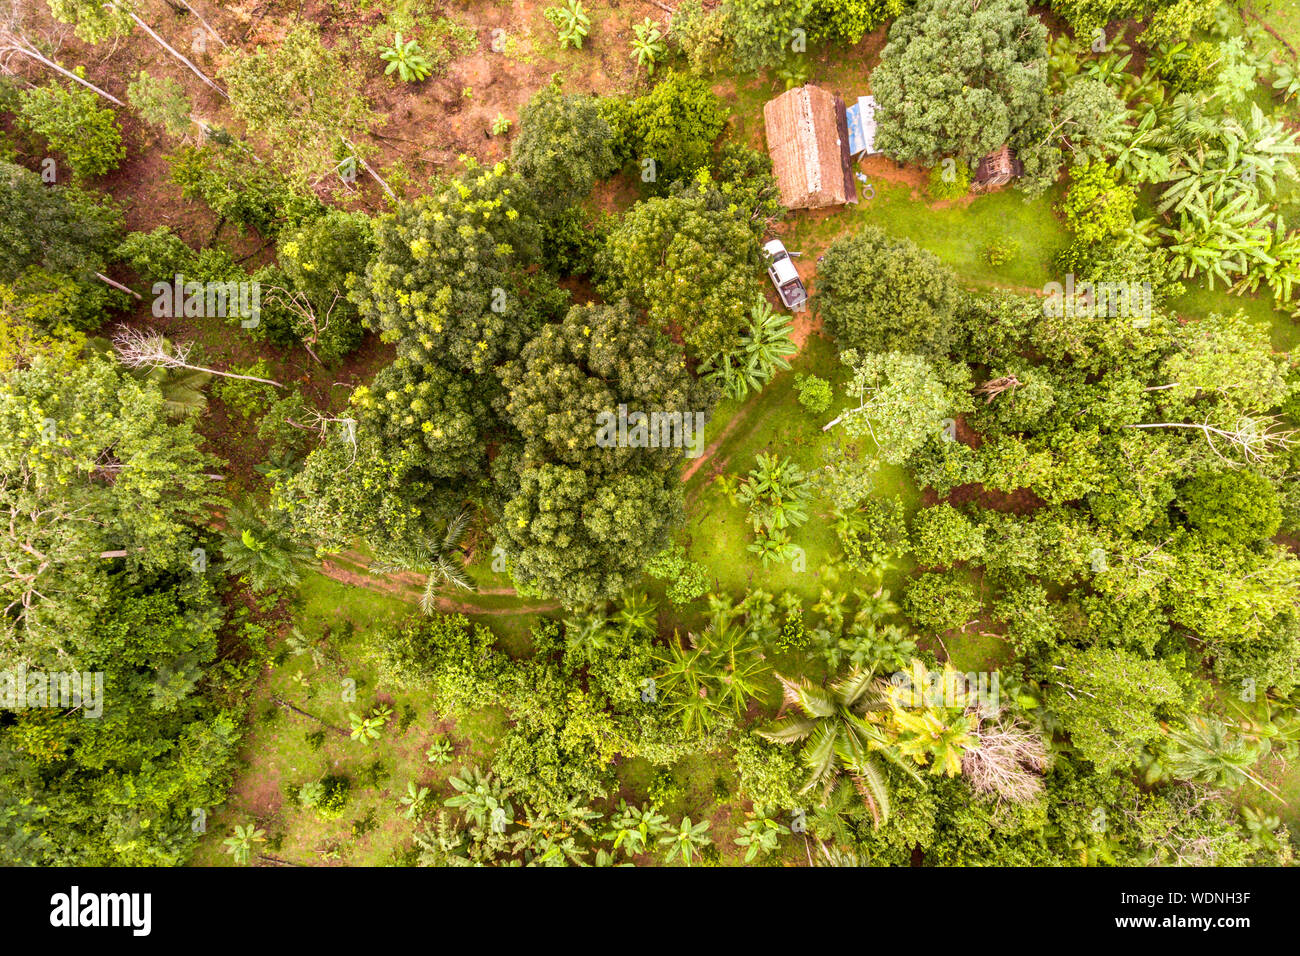 Amazon Agroforestry Parcel/Land with a Variety of Tropical Crops a Bananas, Brazil Nuts, Copoazu, Papaya, Pineapple, Yuca and More Stock Photo